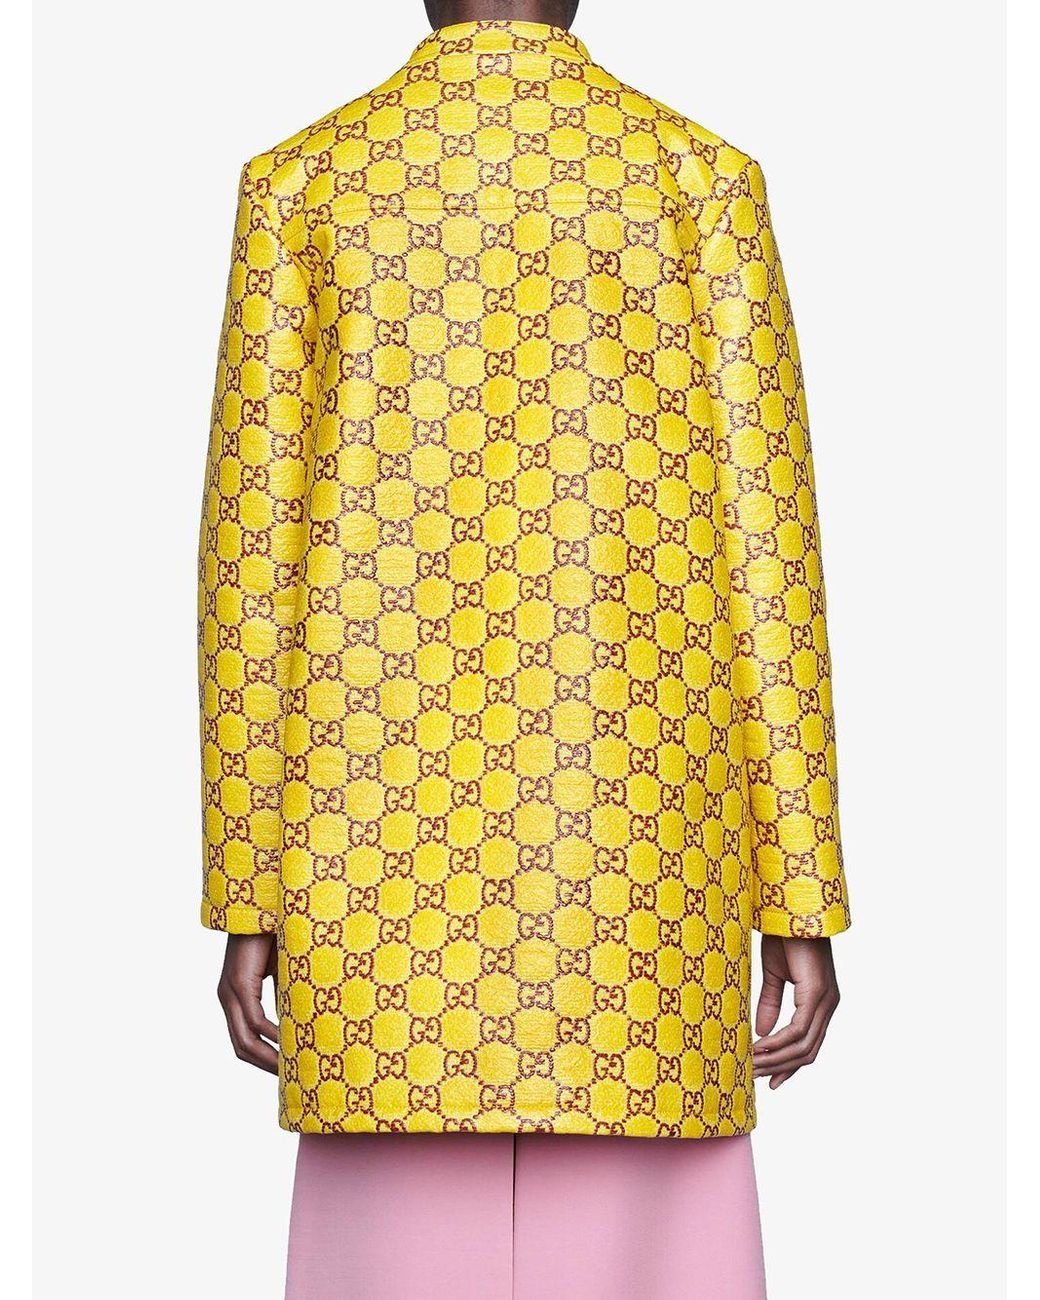 Gucci GG Supreme Single-breasted Coat in Yellow | Lyst Canada